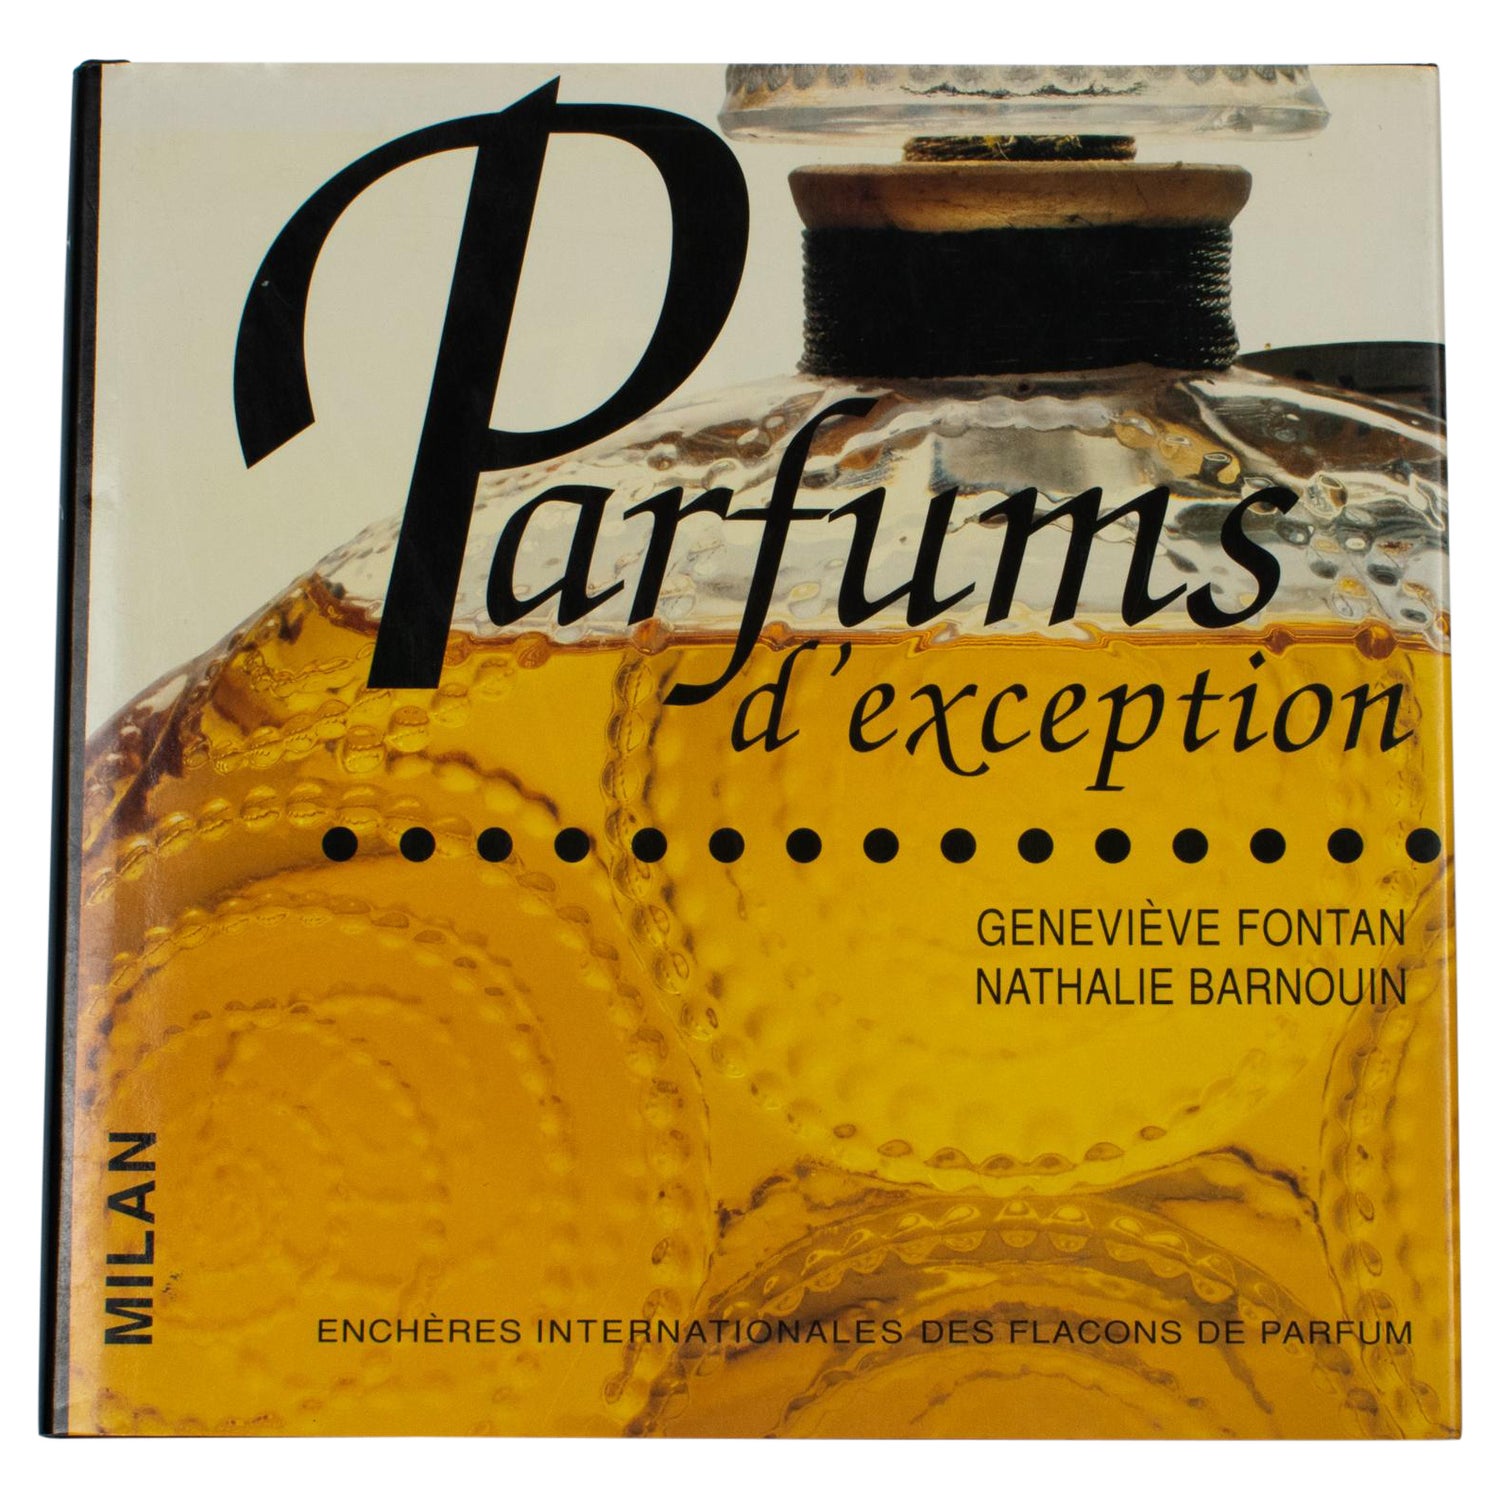 Parfums d'Exception Book, International Auction Results by Genevieve Fontan  1993 sur 1stDibs